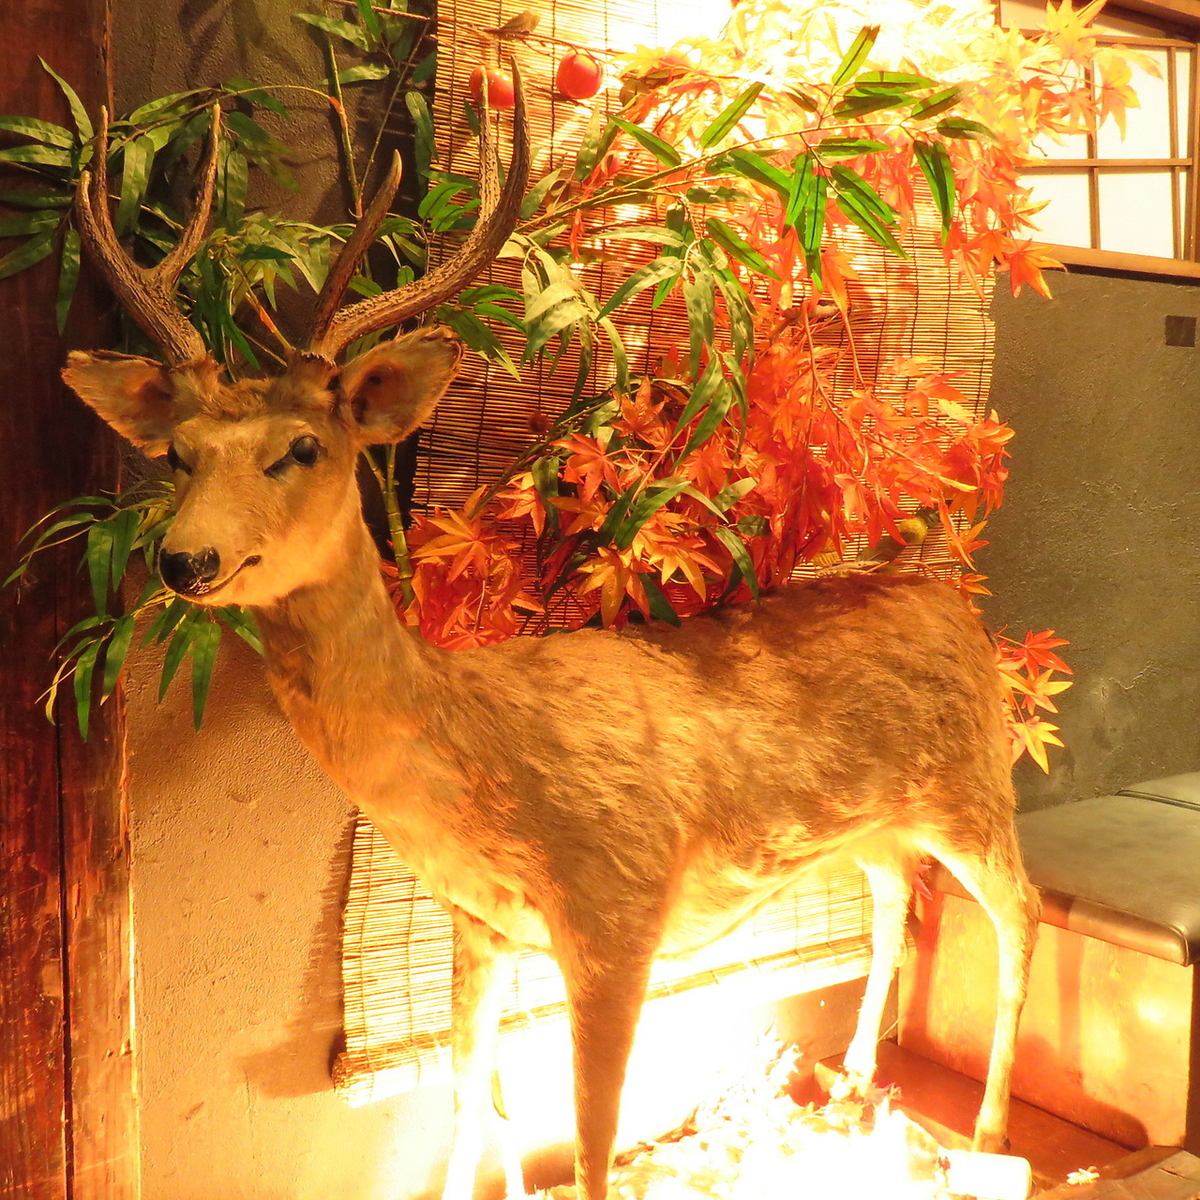 [All seats are private rooms] Stuffed deer welcomes you♪ Yakitori izakaya with completely private rooms